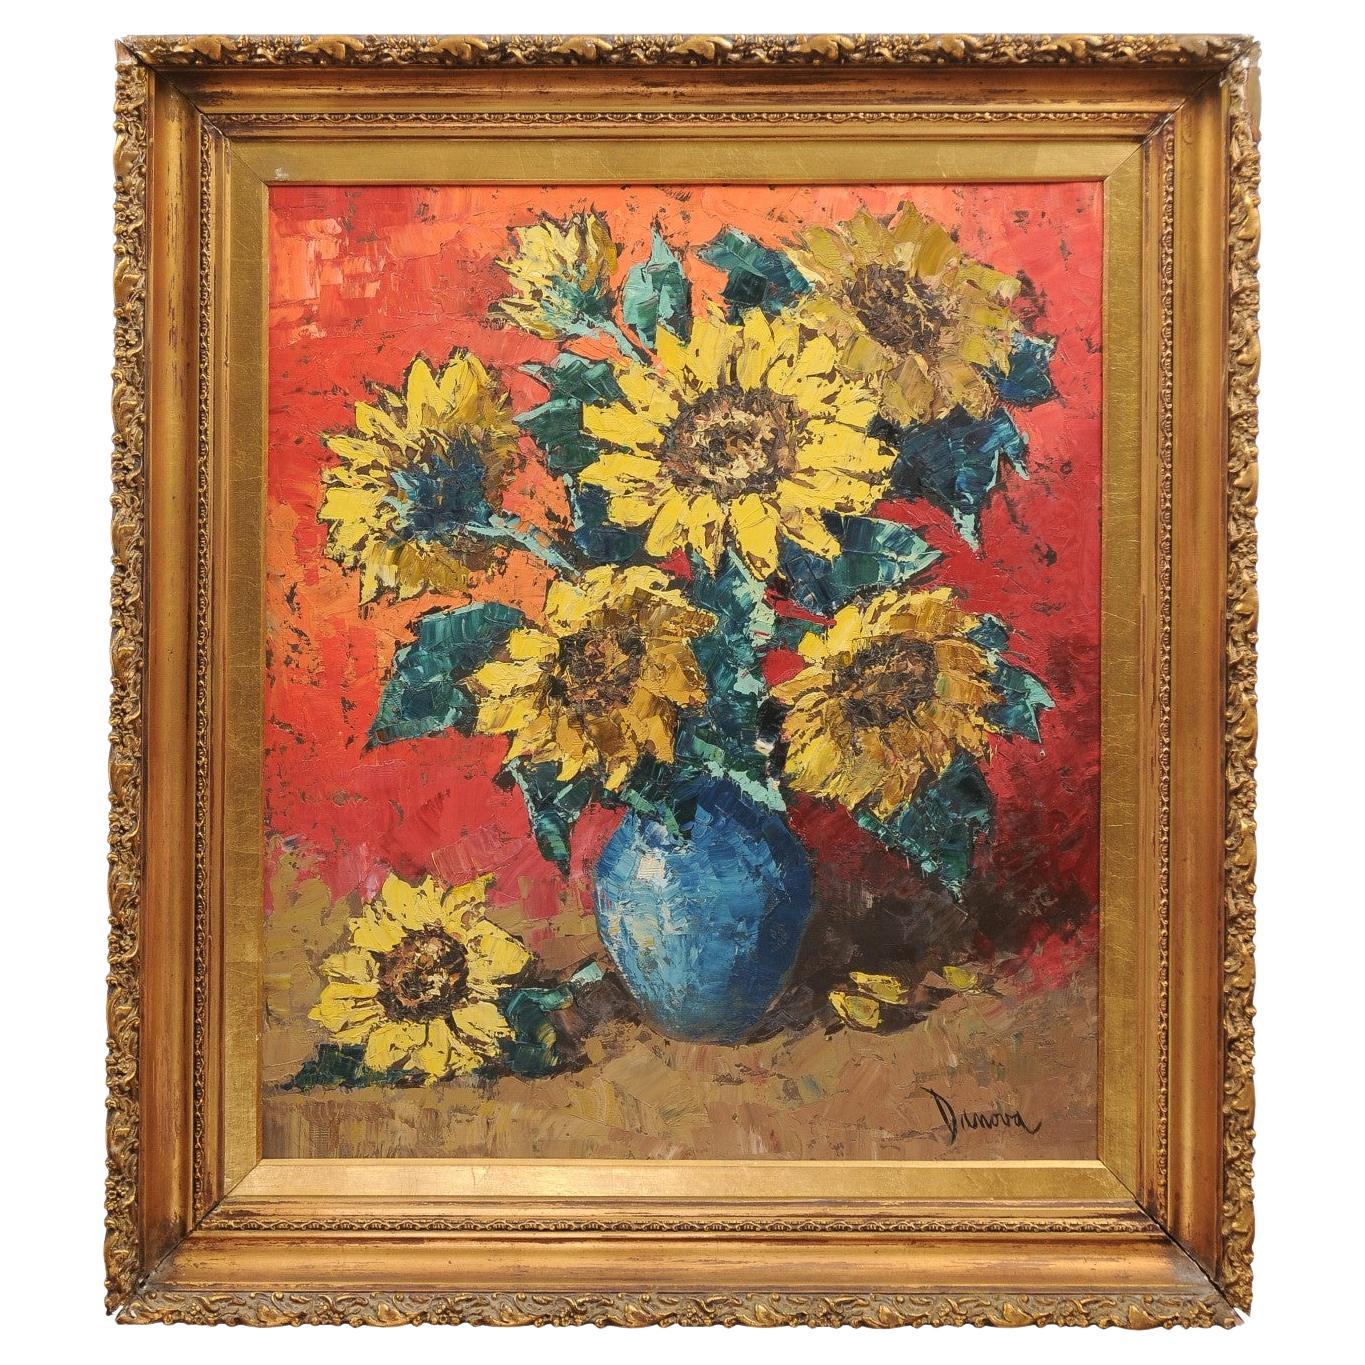  Giltwood Framed Oil on Board Painting of Sunflowers in Vase, Signed, 20th c.